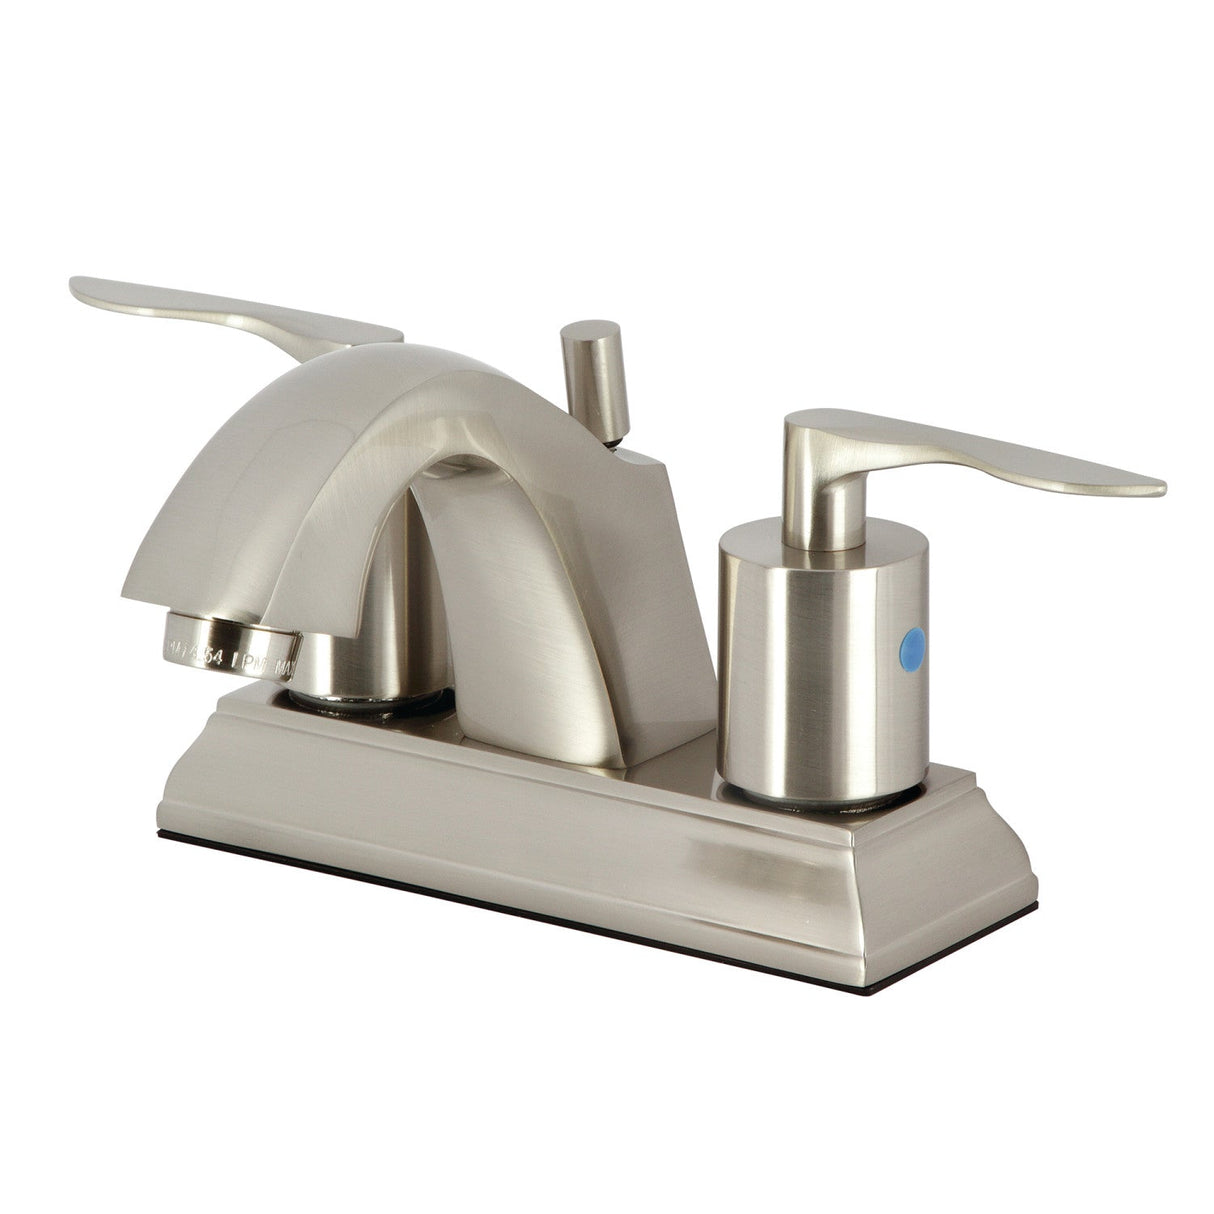 Serena FSC4648SVL Two-Handle 3-Hole Deck Mount 4" Centerset Bathroom Faucet with Pop-Up Drain, Brushed Nickel